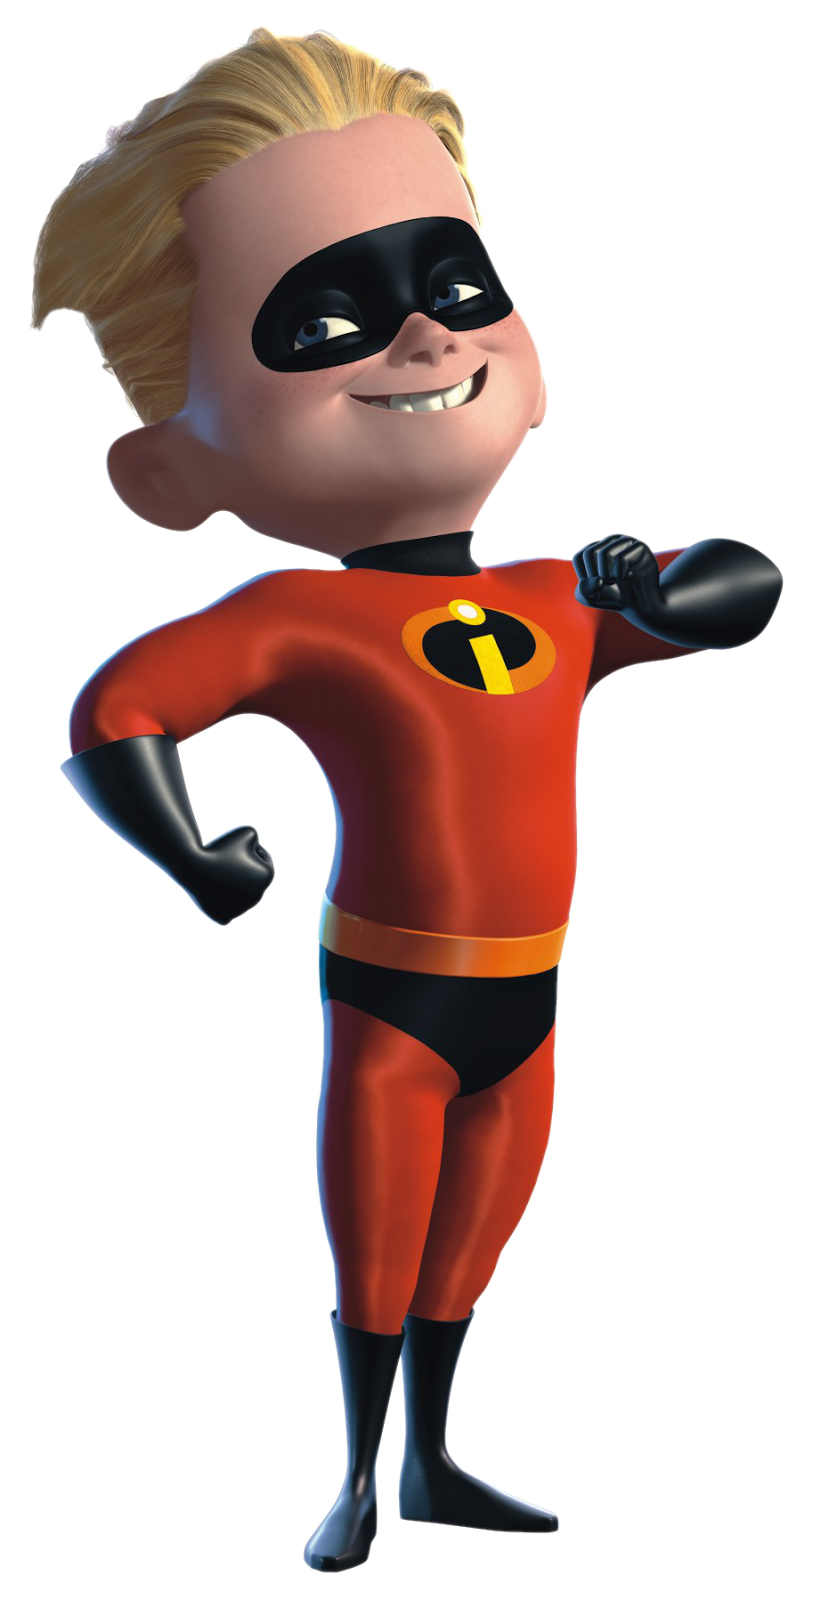 Download PNG image - Cartoon Character Transparent Background 